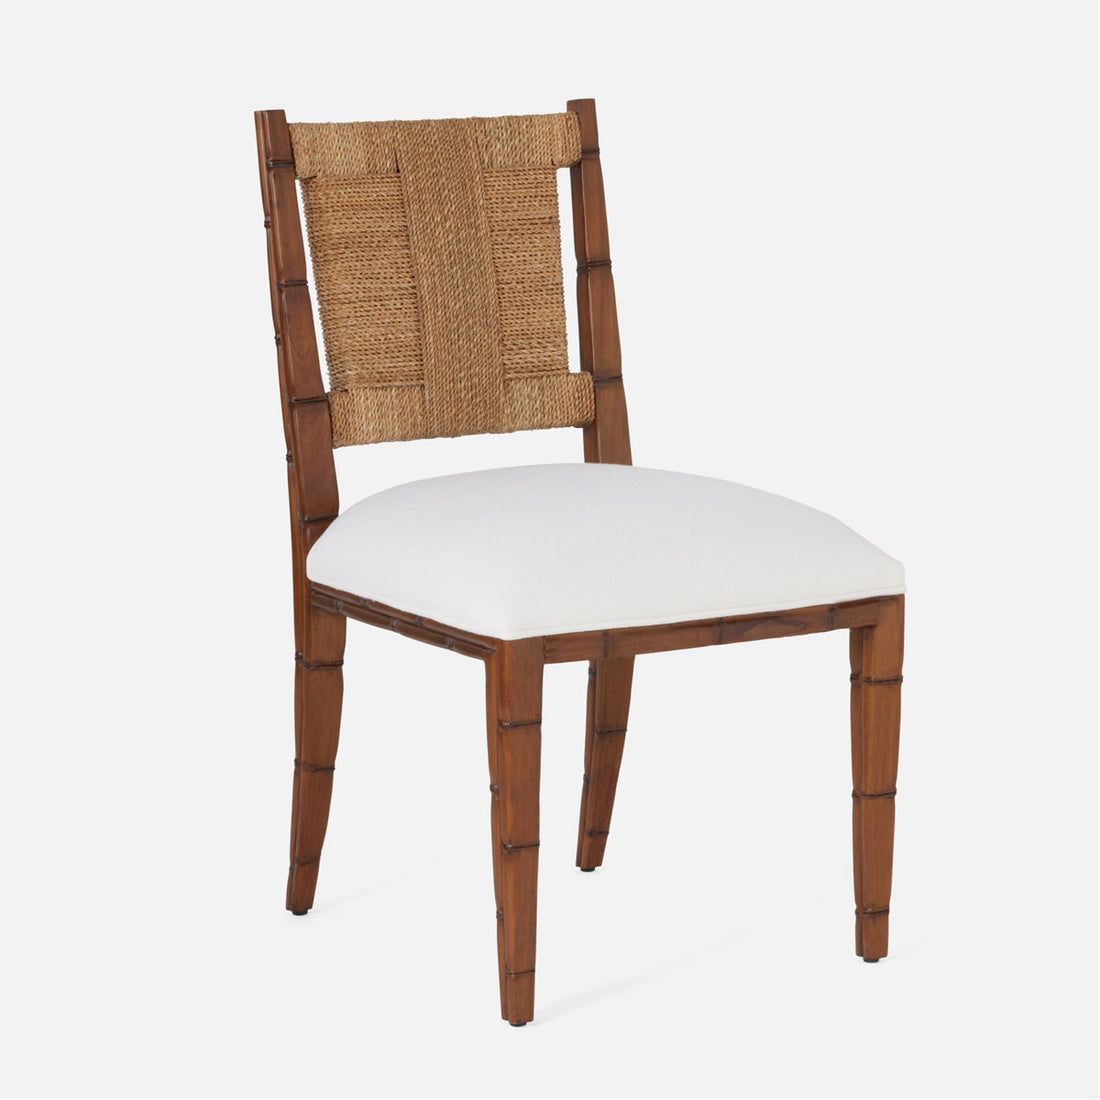 Made Goods Kiera Dining Chair in Clyde Plaid Fabric